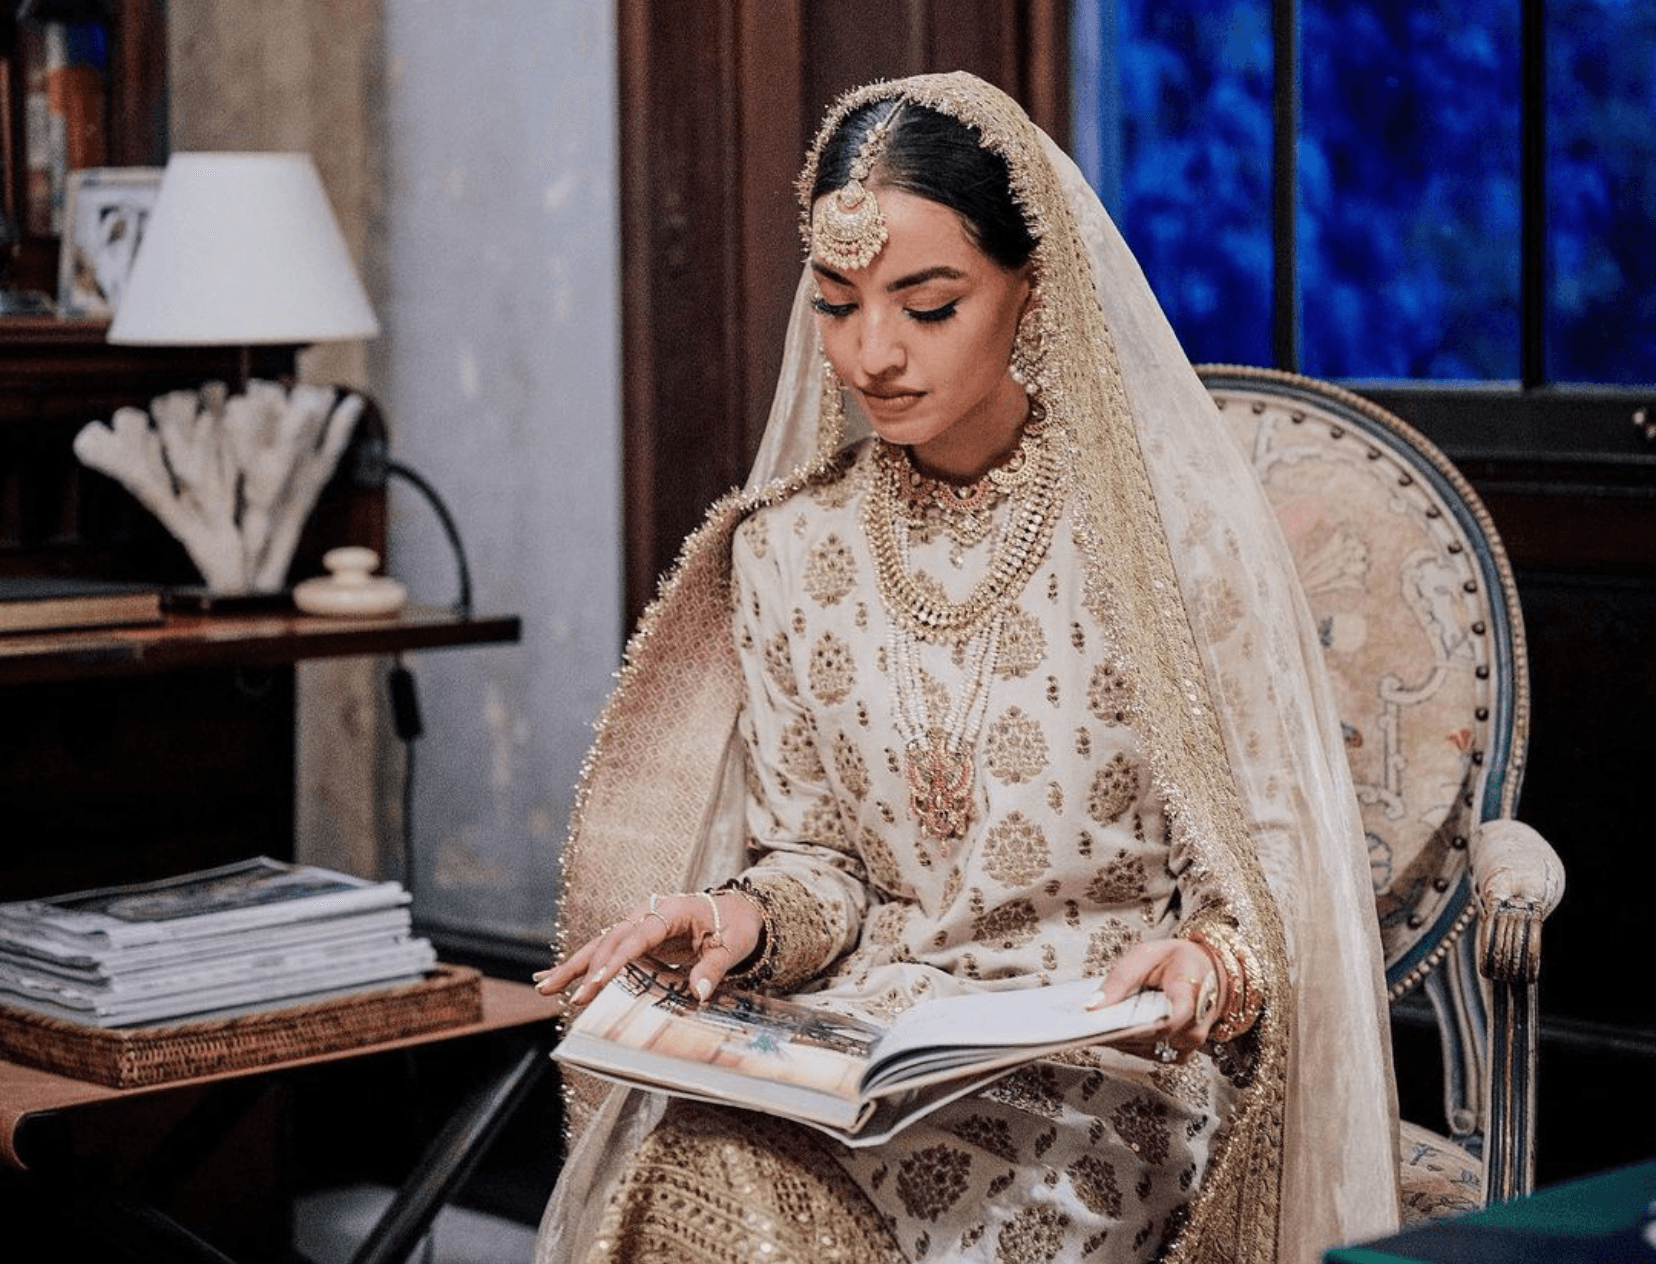 This Bride Wore A Sabyasachi Outfit For Her Nikah But With A Twist!